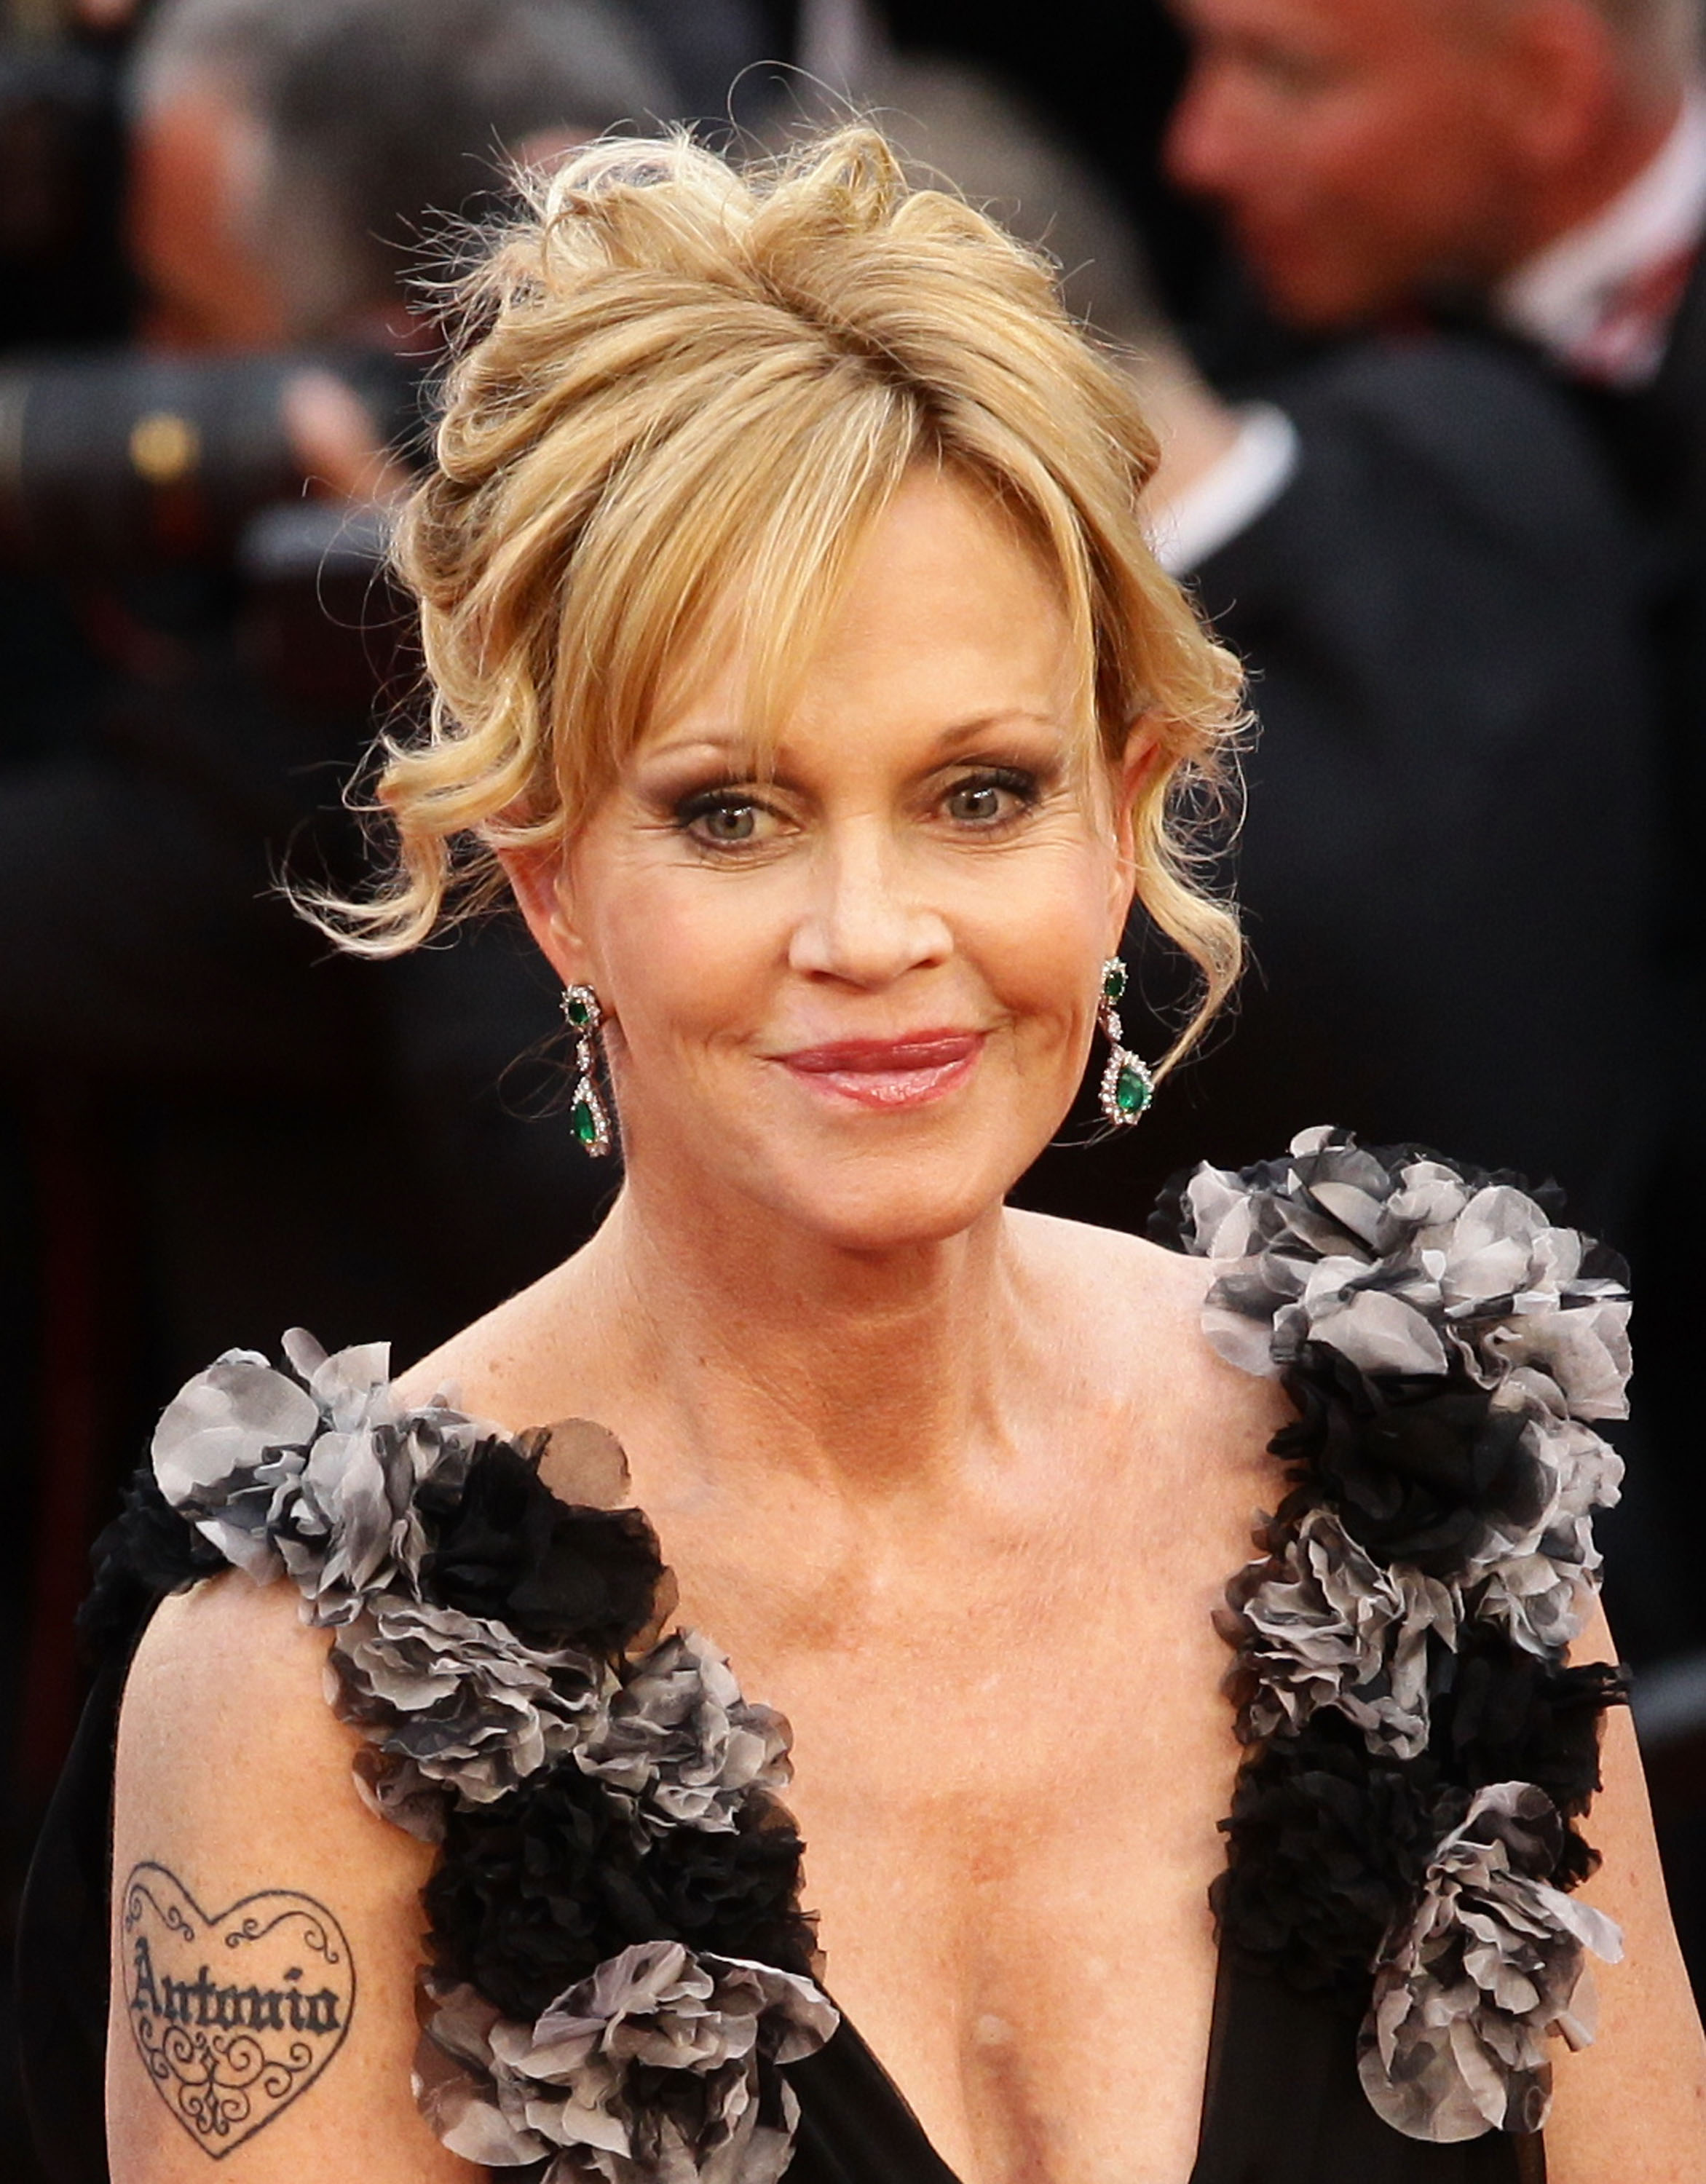 Melanie Griffith attends the Opening Ceremony at the Palais des Festivals during the 64th Cannes Film Festival on May 11, 2011 in Cannes, France. (Vittorio Zunino Celotto&mdash;Getty Images)